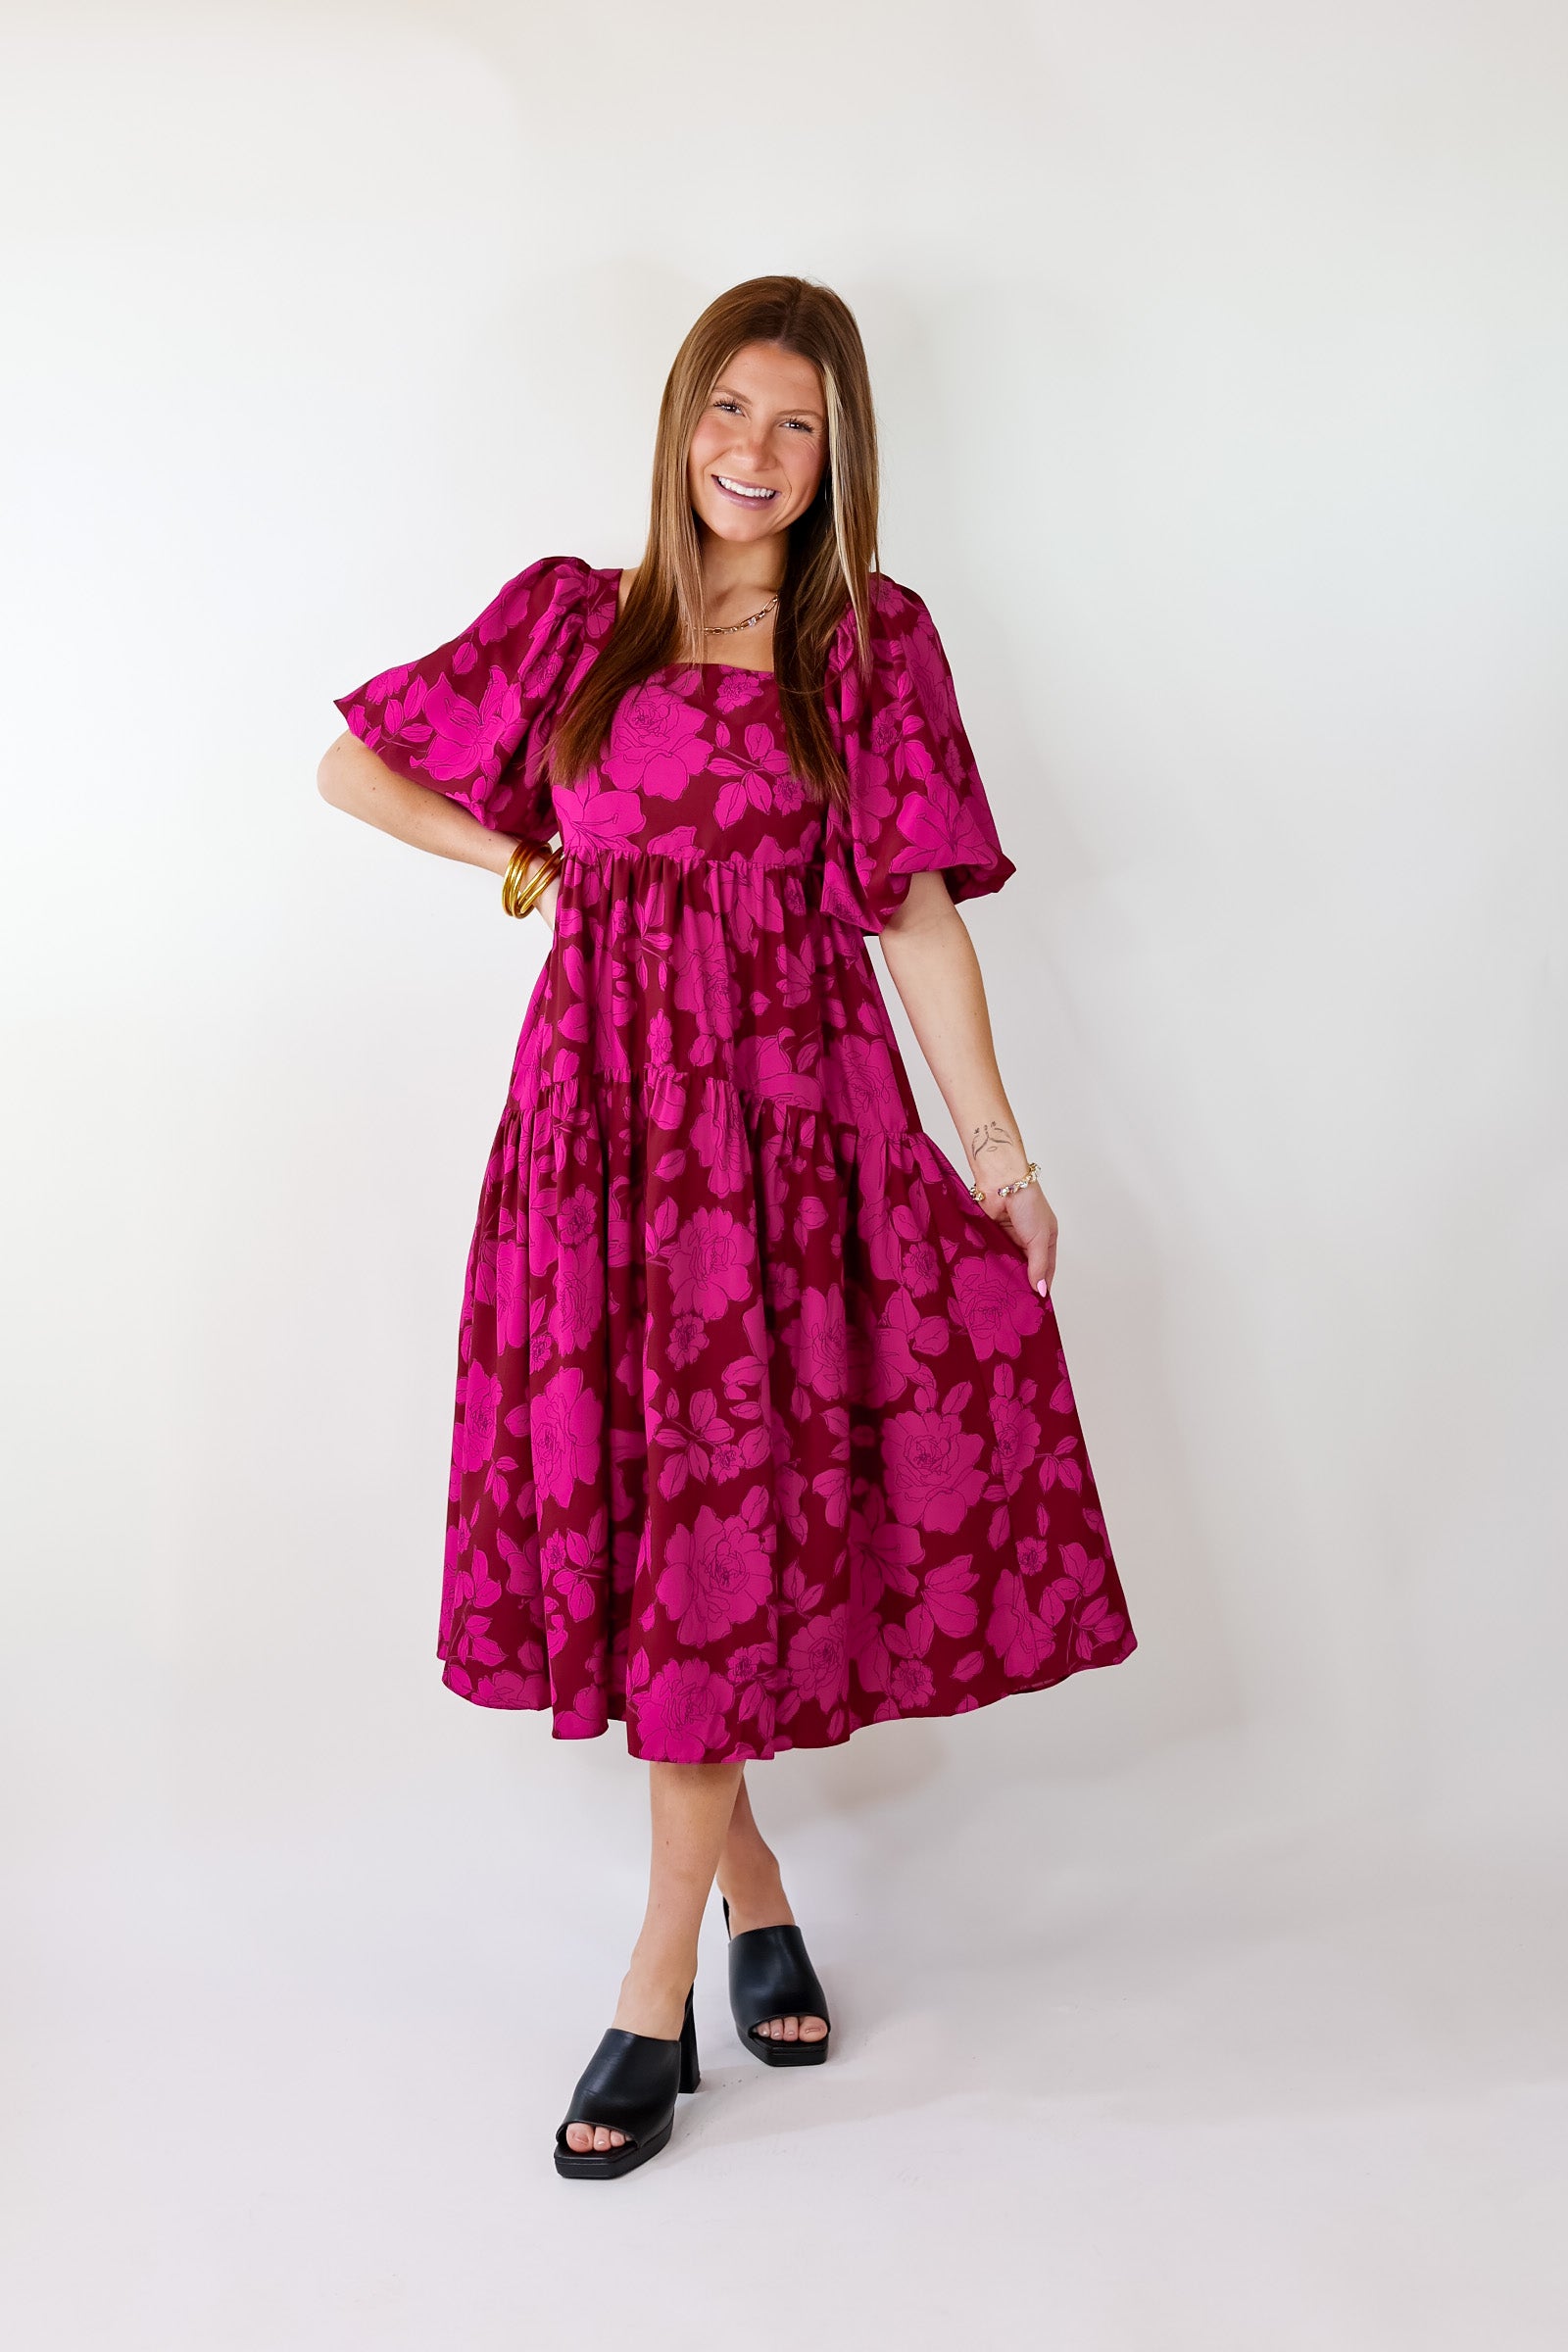 Floral Fascination Tiered Midi Dress In Brick Red and Pink - Giddy Up Glamour Boutique